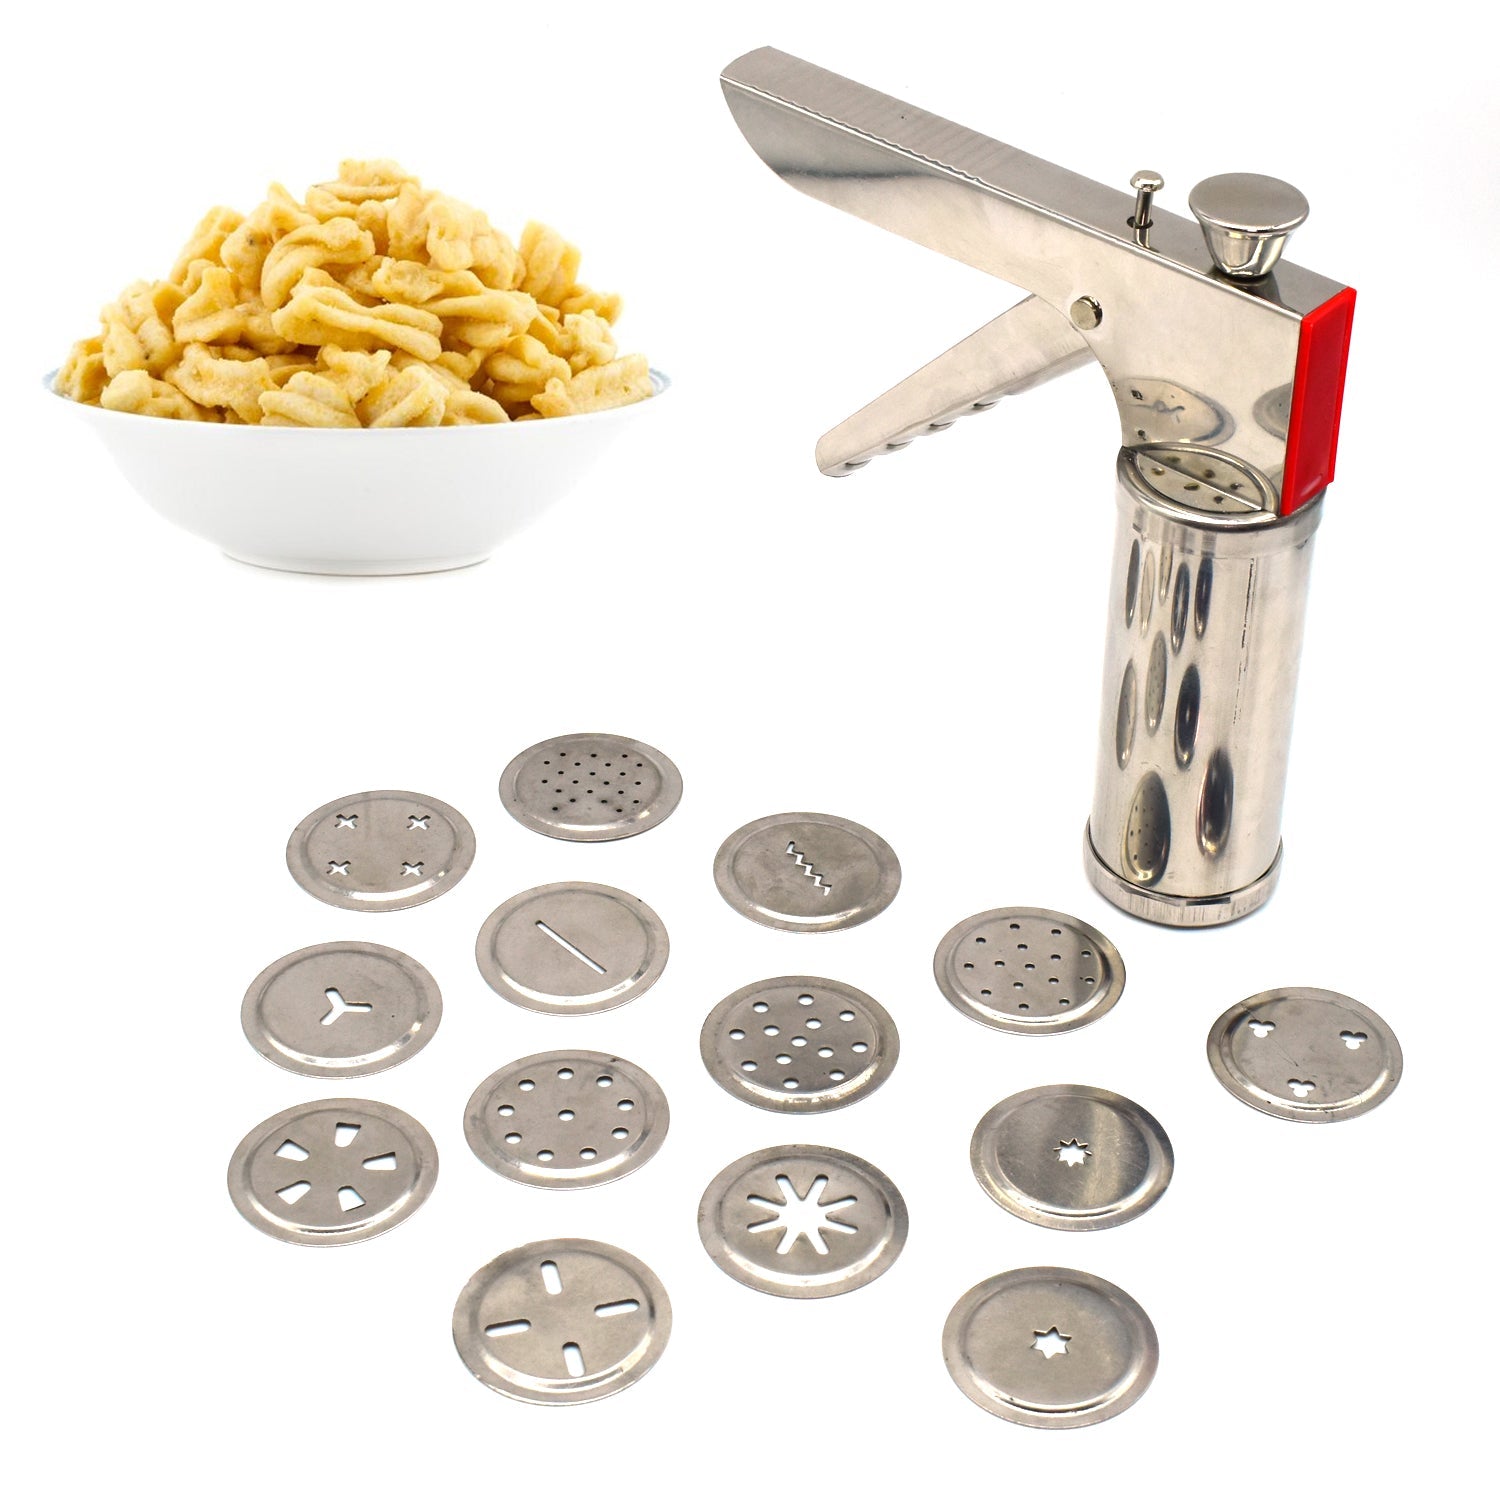 2888 Kitchen Press Sev Maker Machine Chakli Maker Noodles Cookies Namkeen Maker with 15 Different Types of Stainless Steel plates, Silver DeoDap